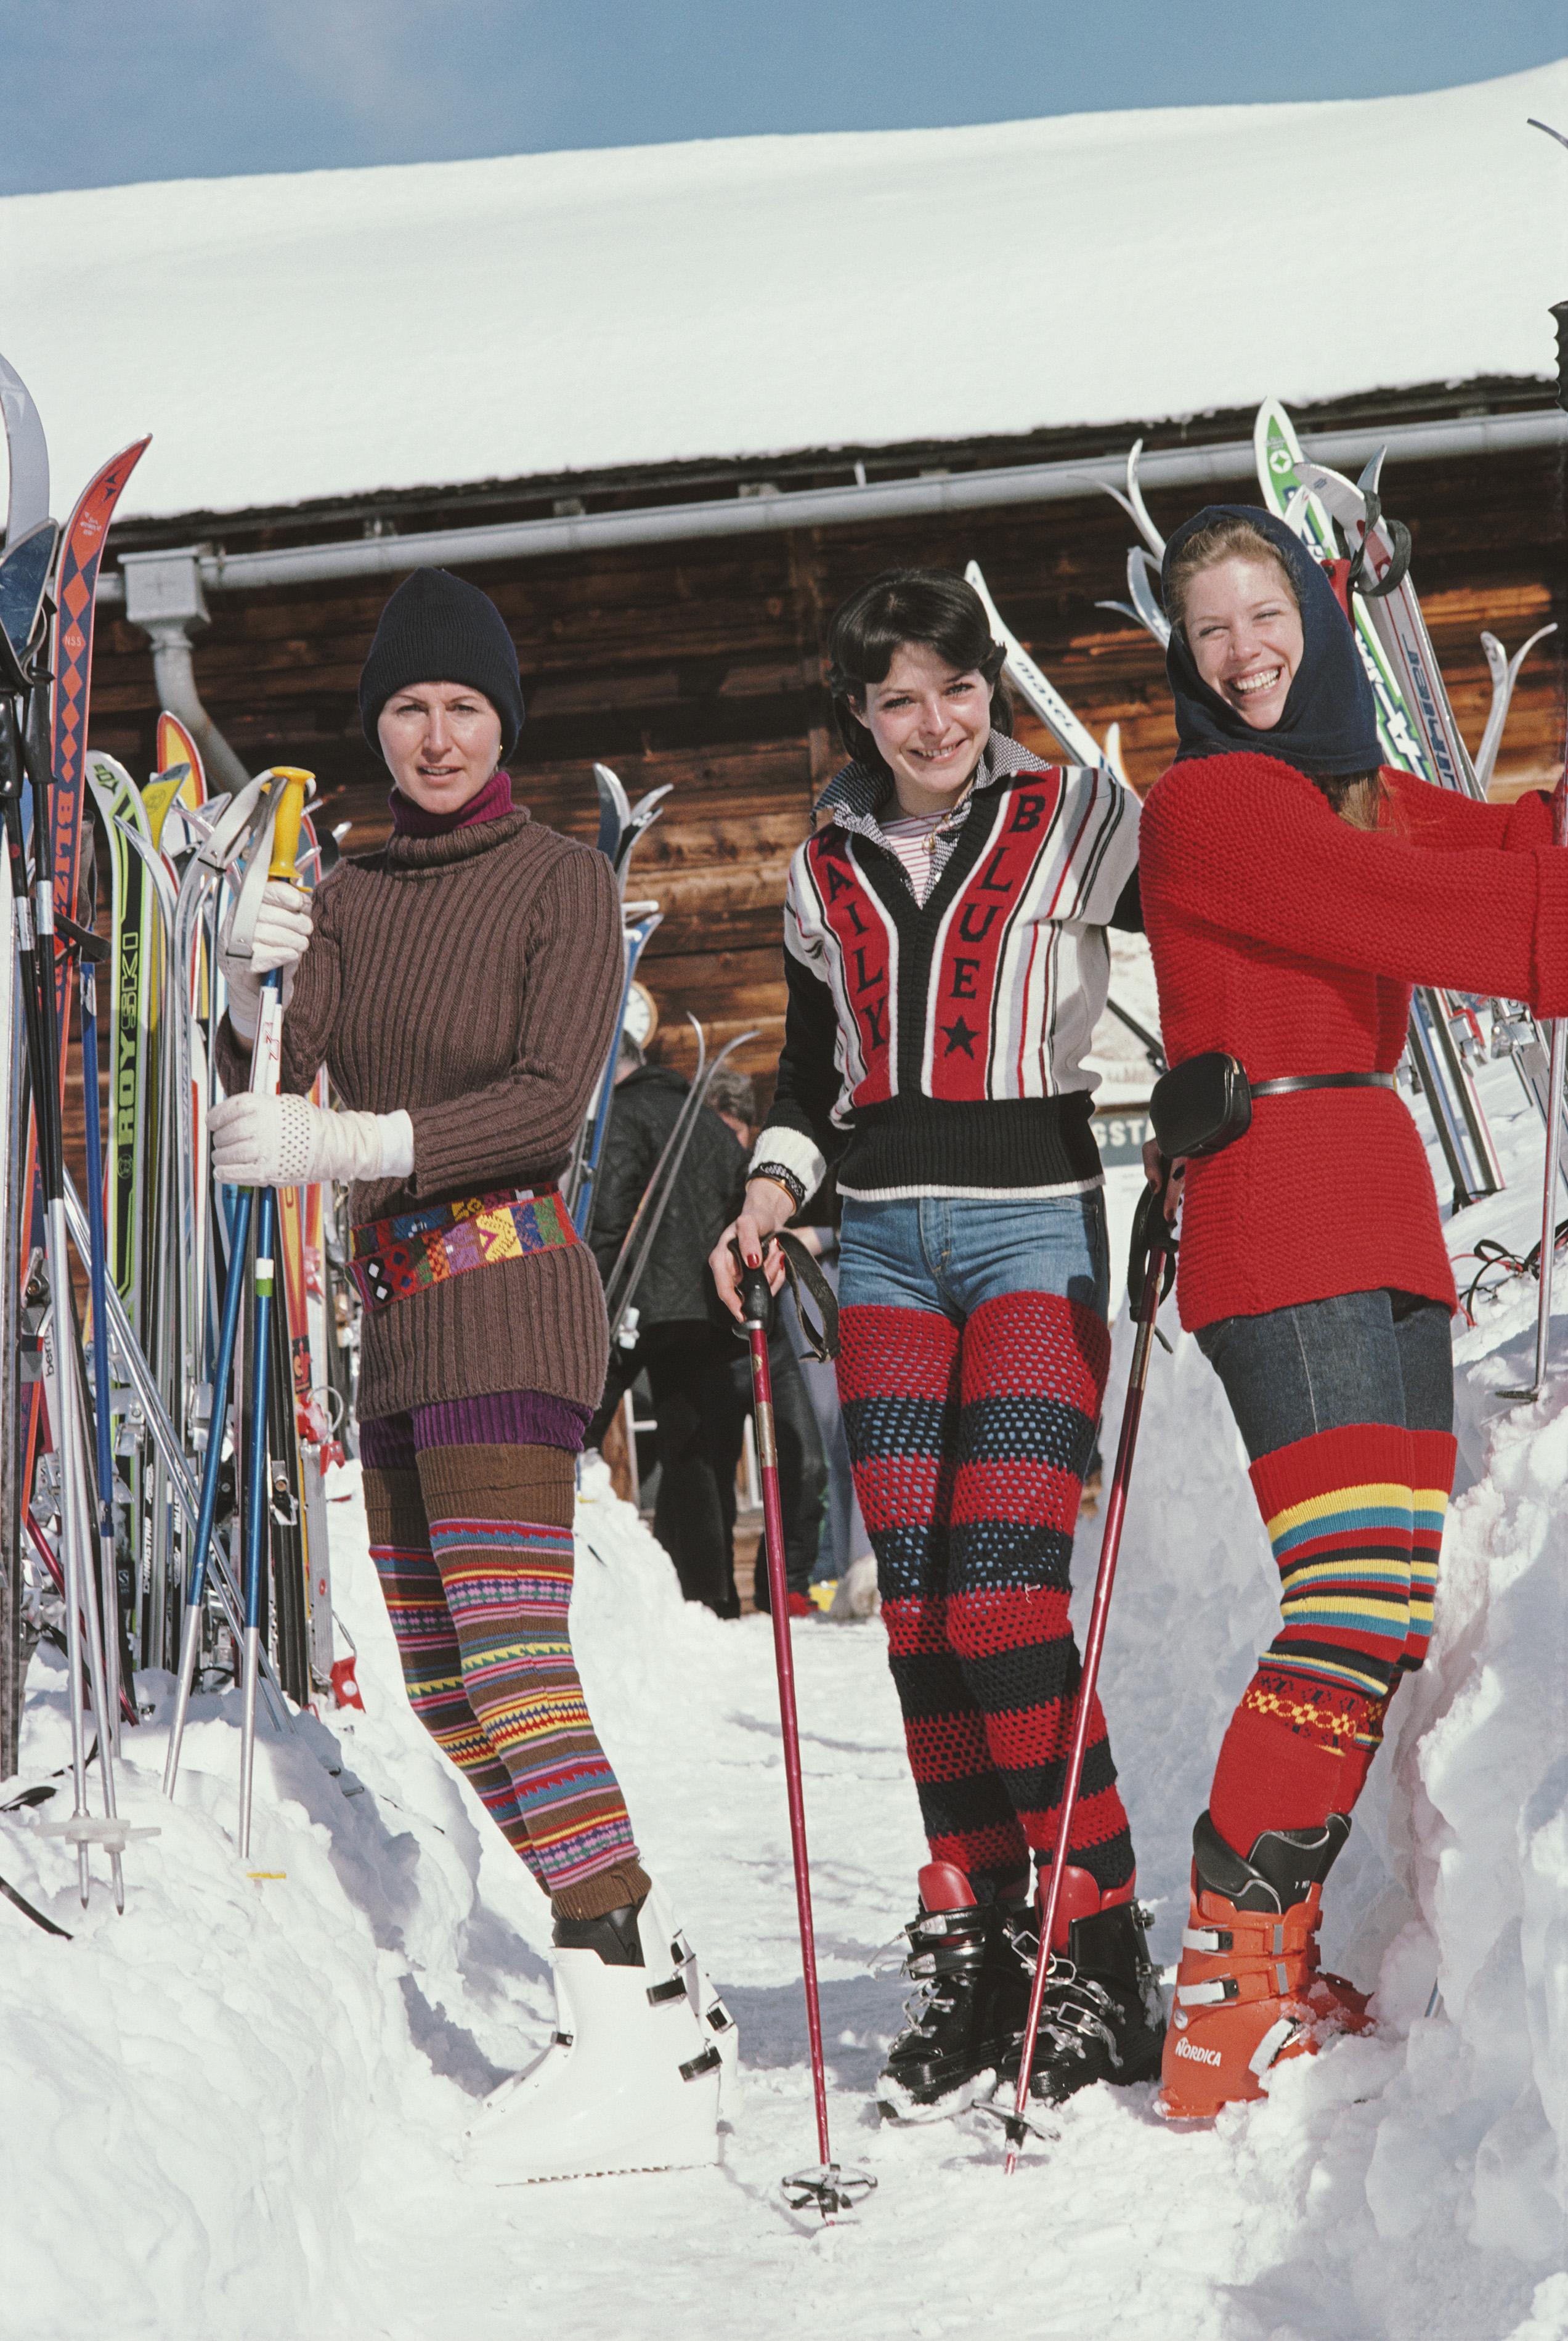 Slim Aarons Portrait Photograph - Skiing in Gstaad, Estate Edition